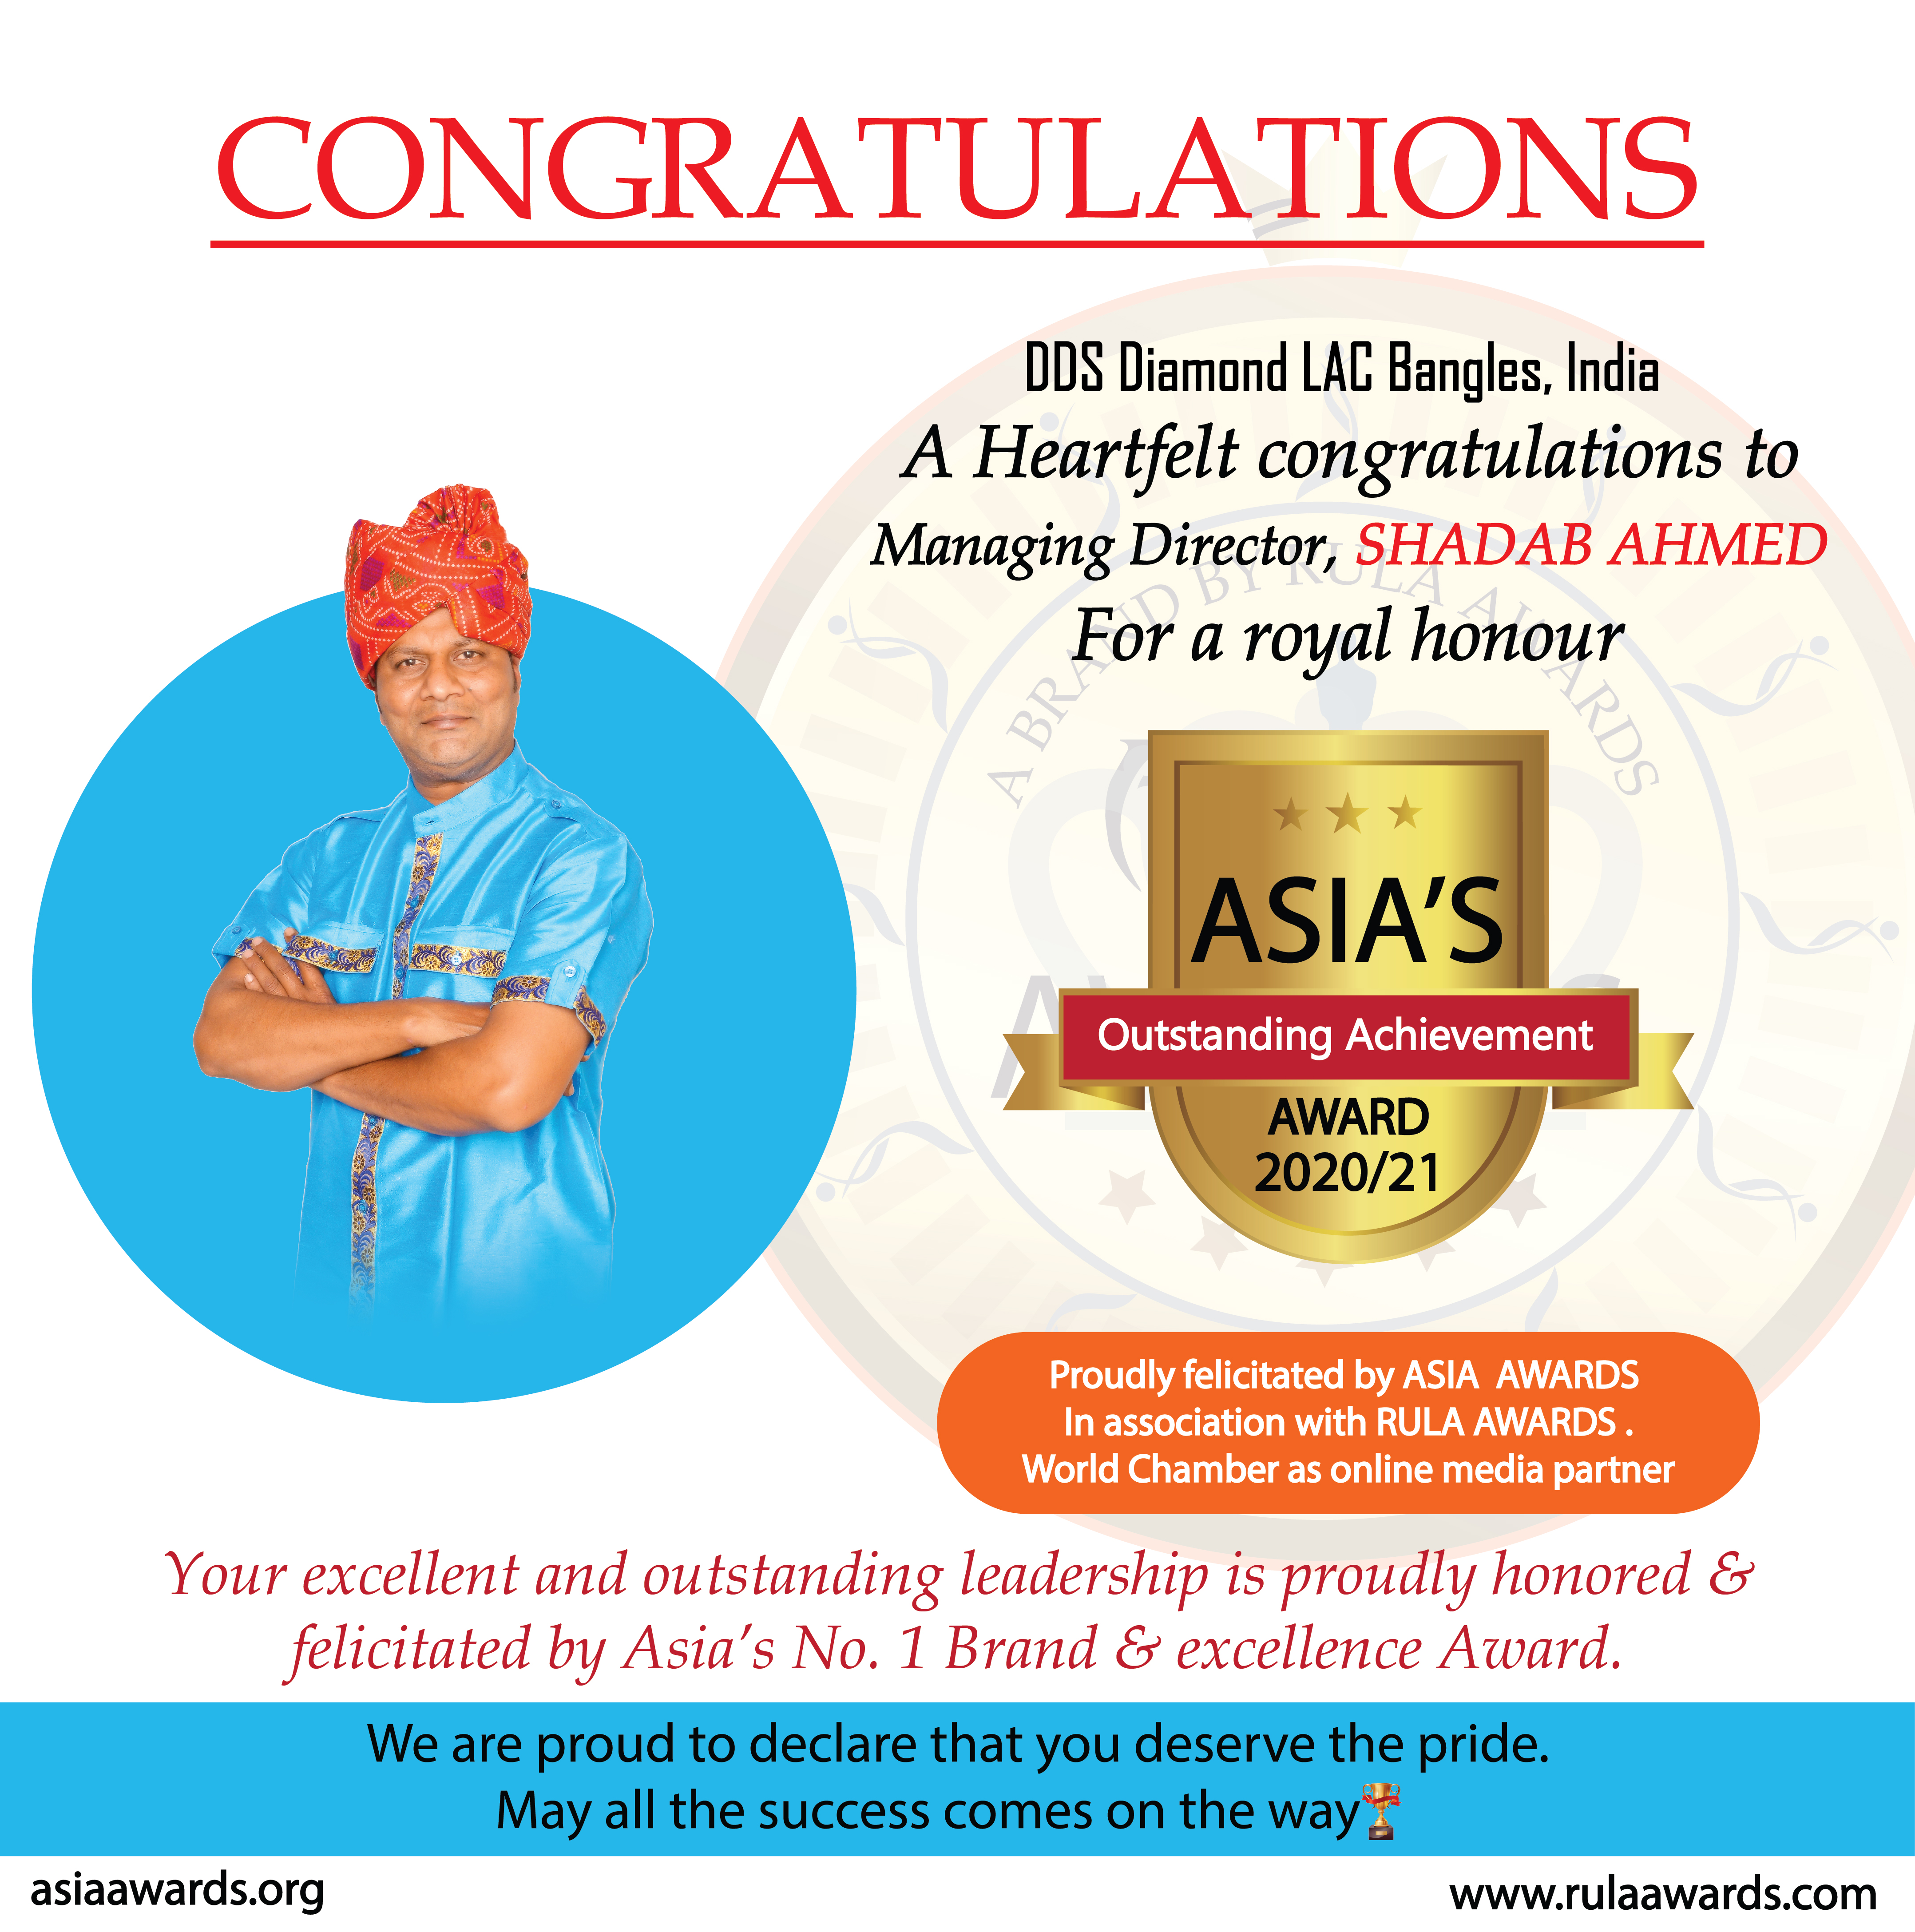 Shadab Ahmed has Asia's Outstanding Achievement Award